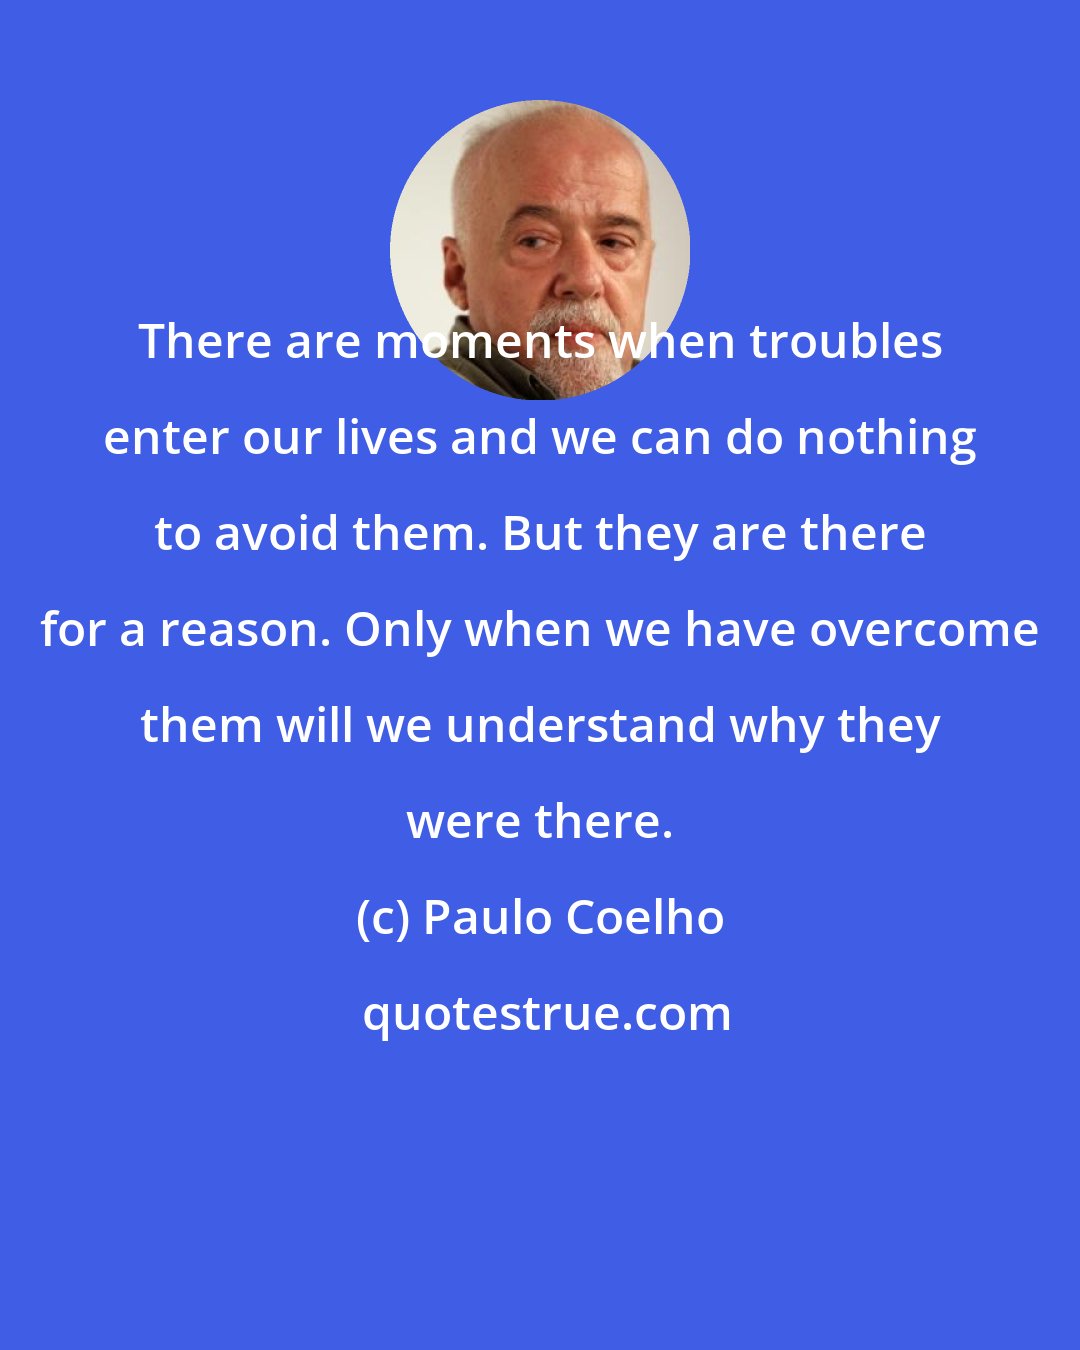 Paulo Coelho: There are moments when troubles enter our lives and we can do nothing to avoid them. But they are there for a reason. Only when we have overcome them will we understand why they were there.